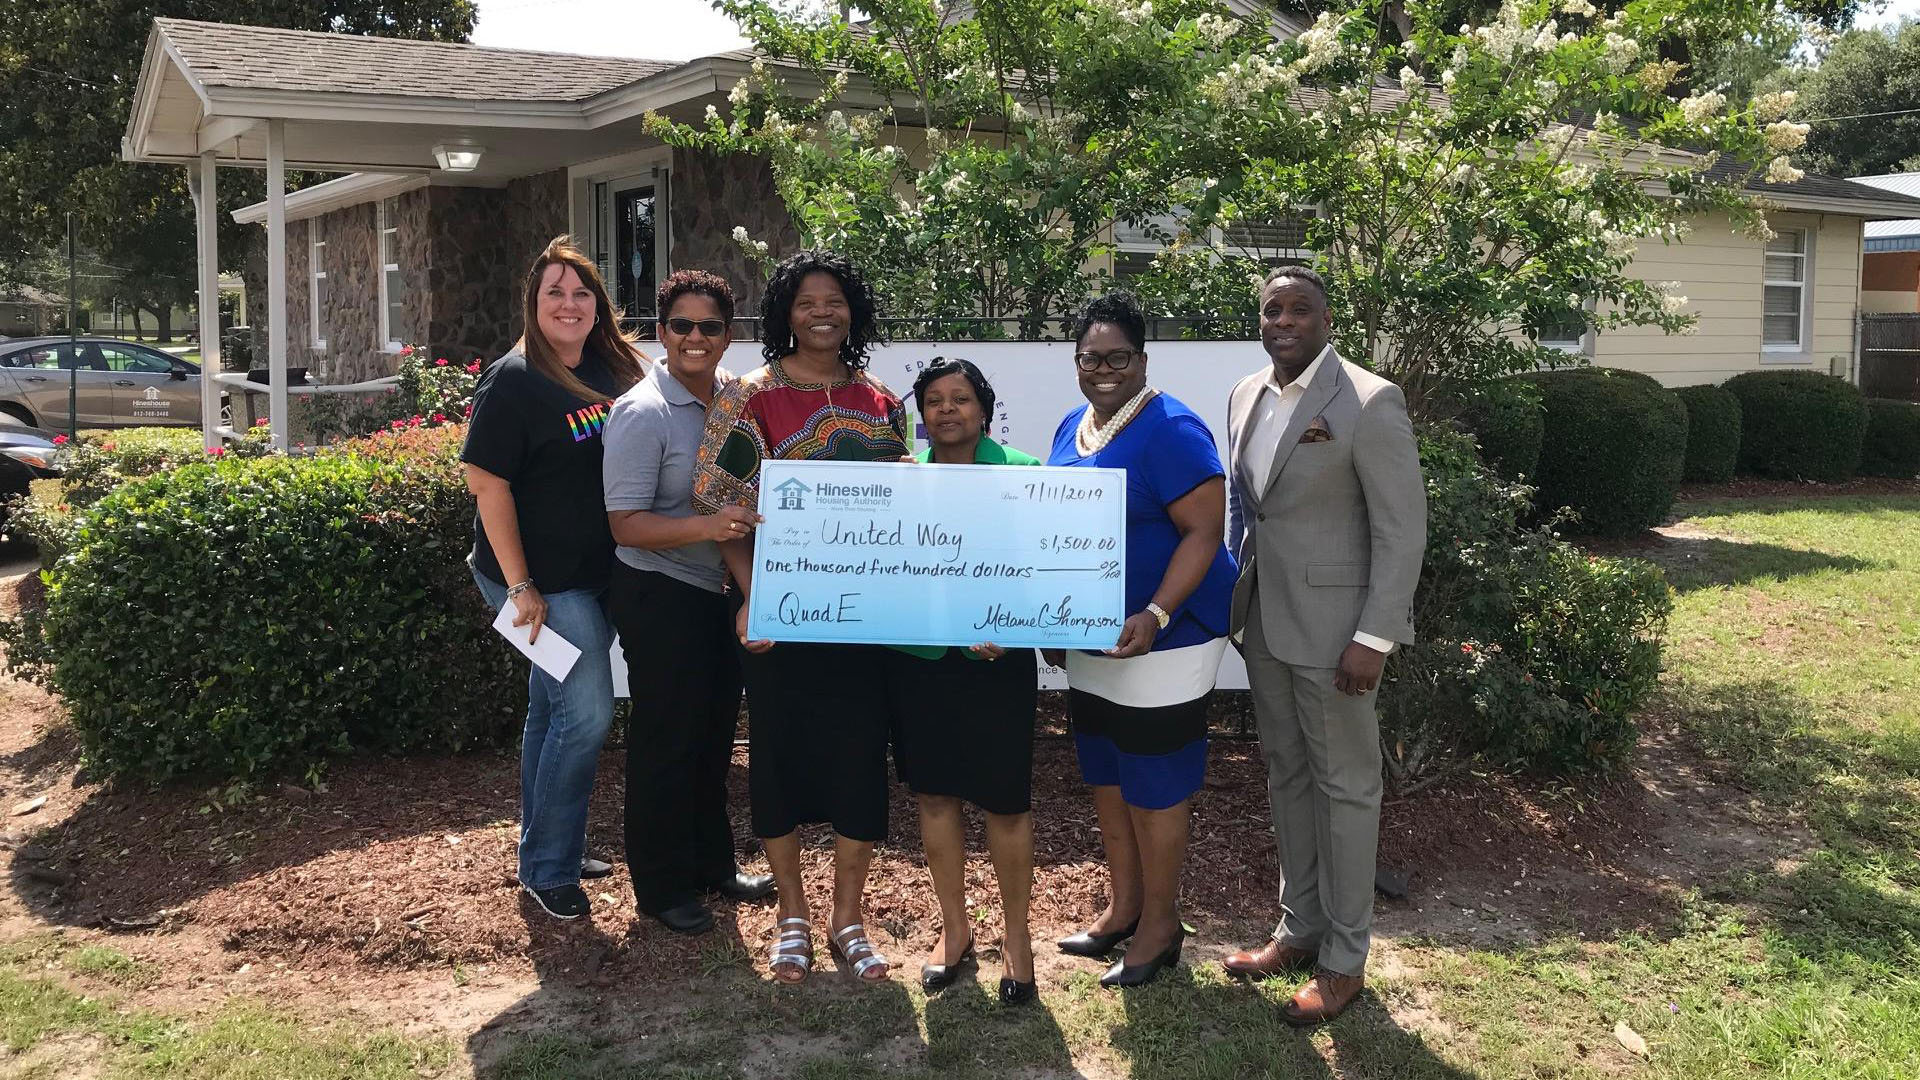 Housing authority donates $1,500 for health care services - Hinesville Housing Authority - Hinesville, GA